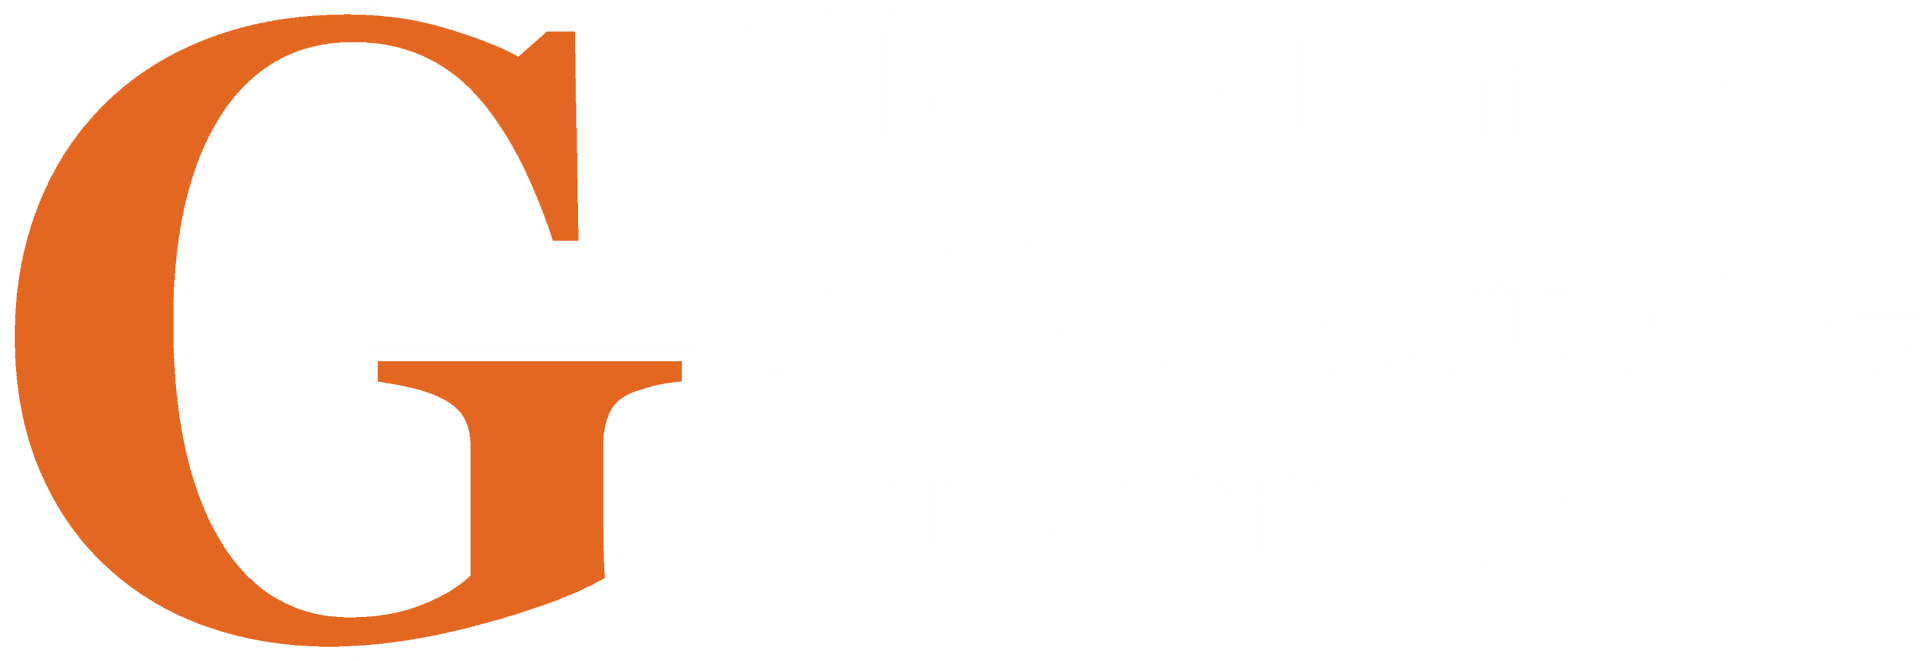 gillear lime & sandstone quarries